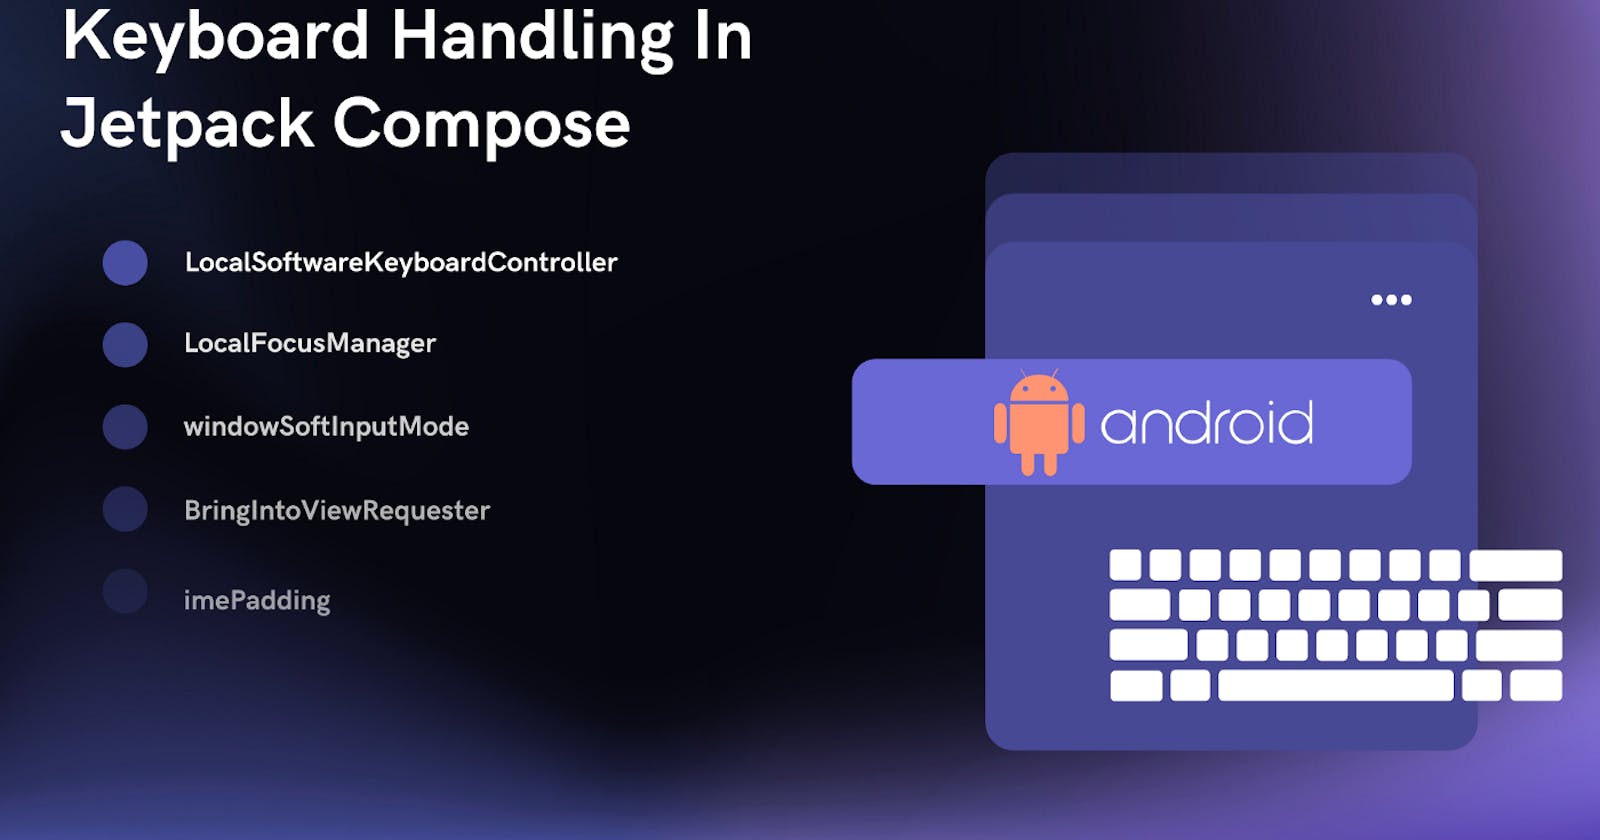 Keyboard Handling In Jetpack Compose — All You Need To Know